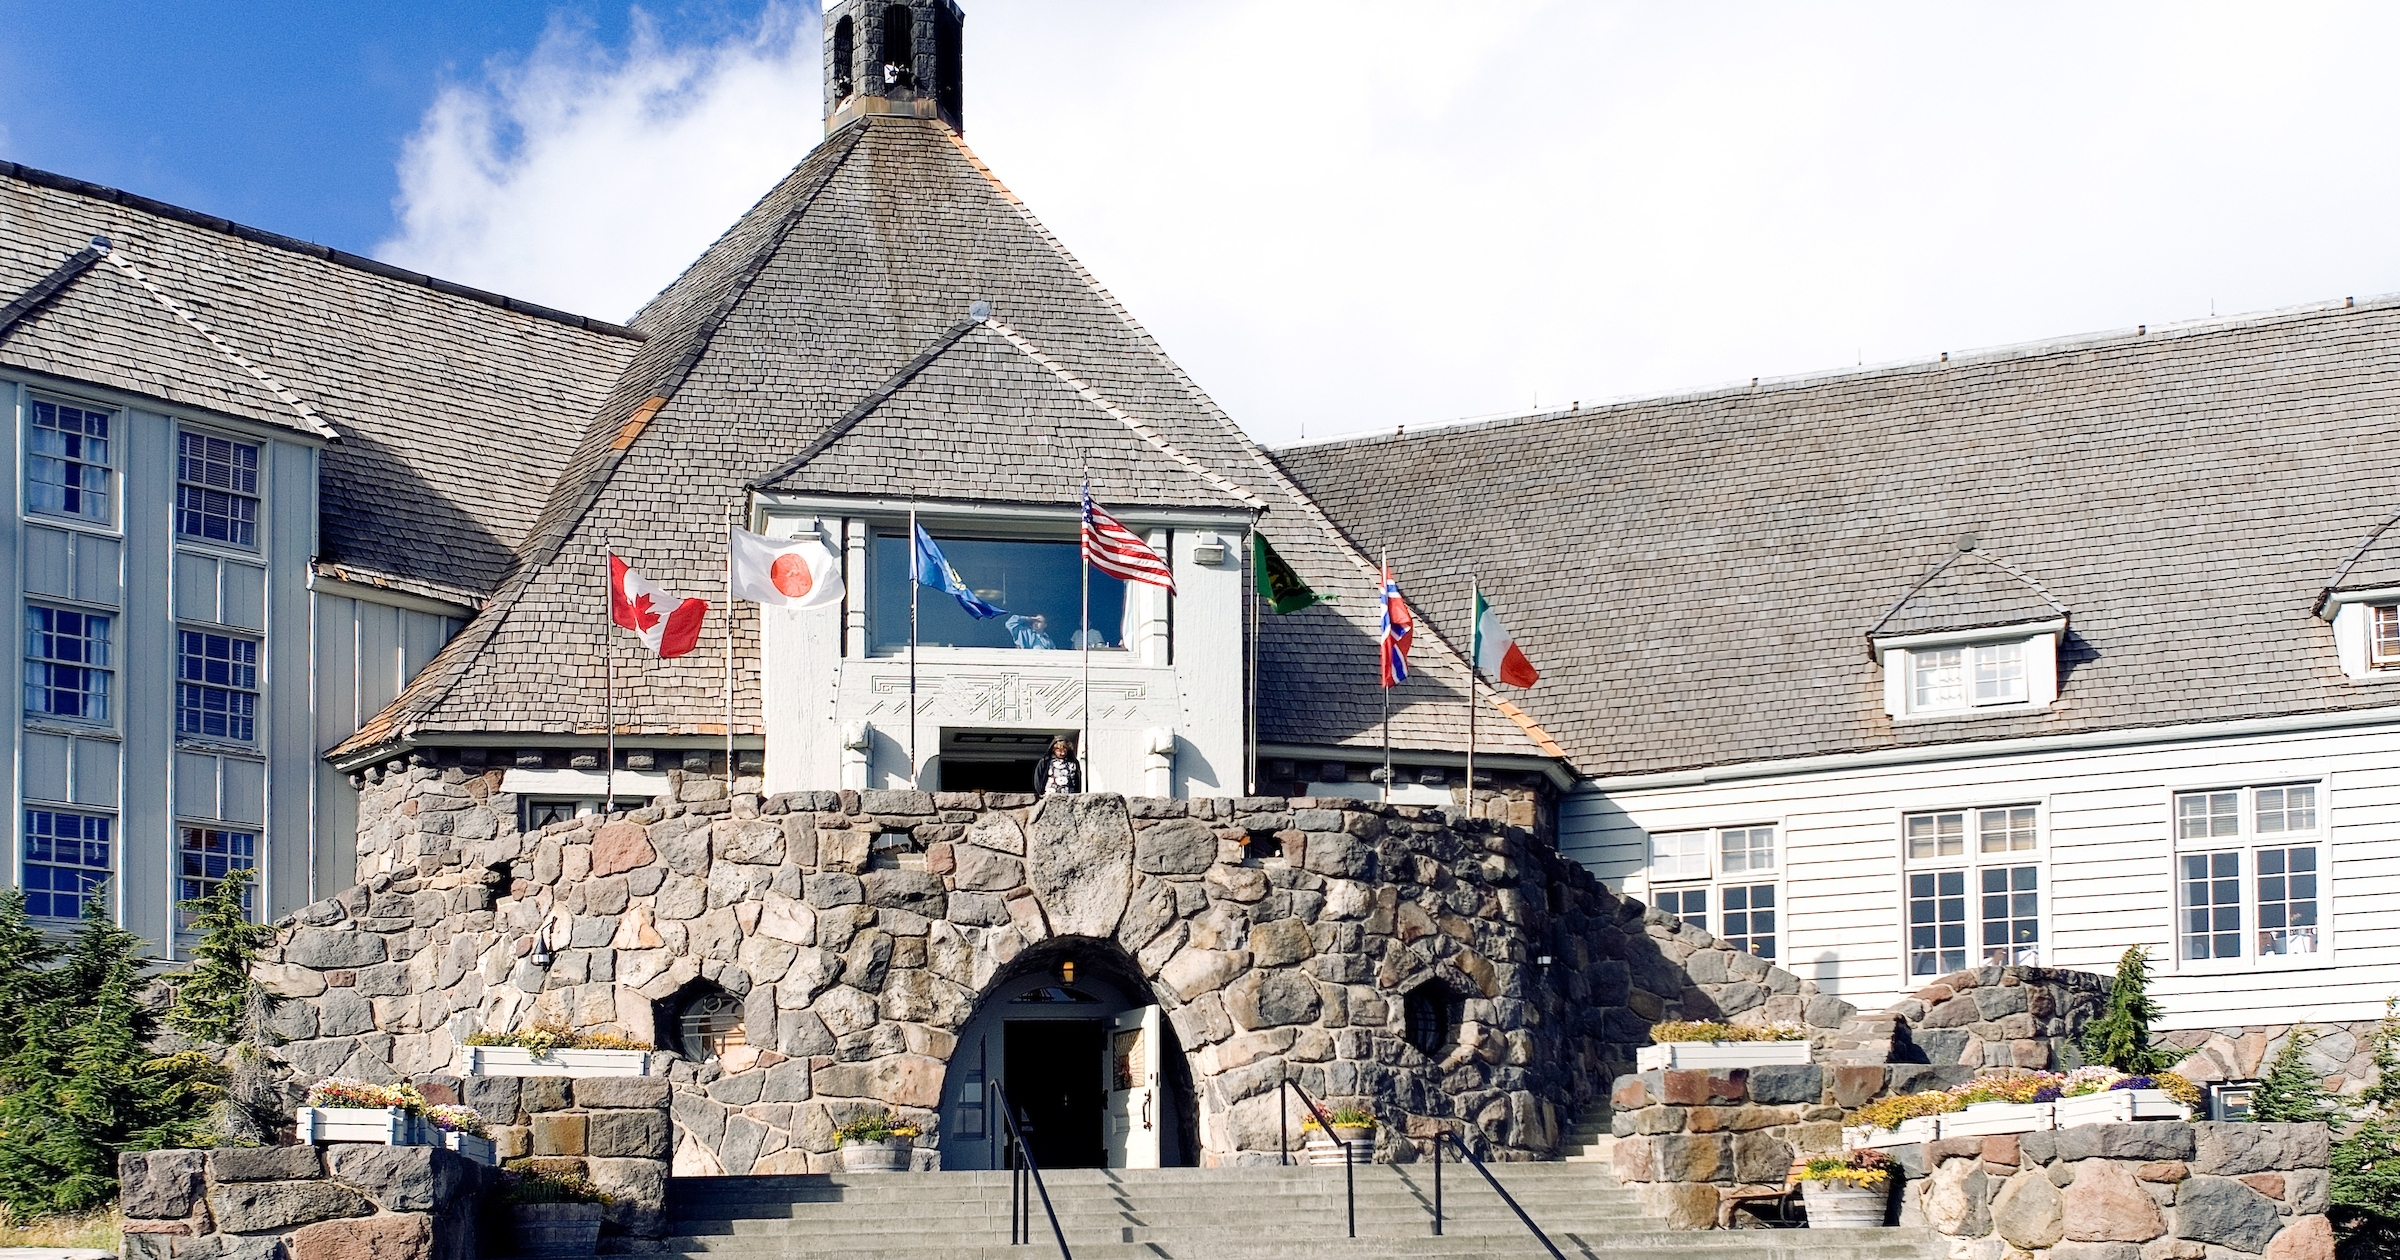 CONTACT US | Timberline Lodge